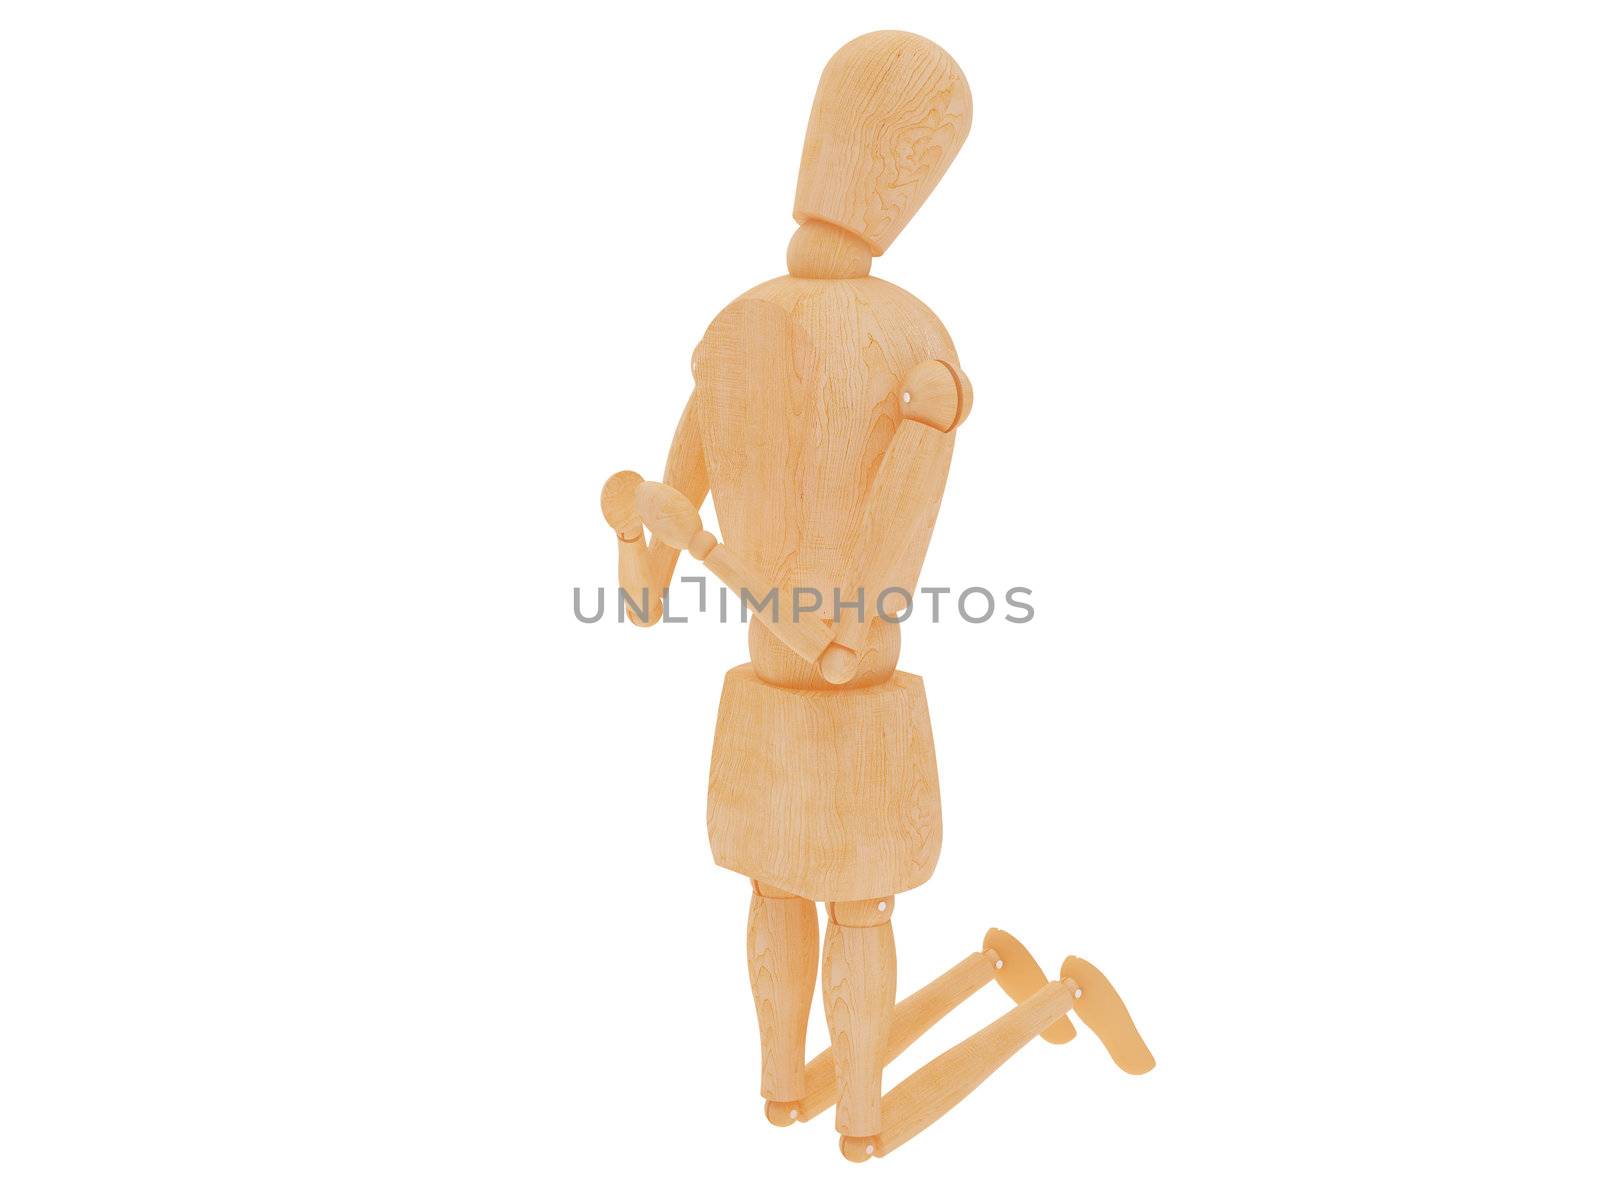 Wooden man by rook